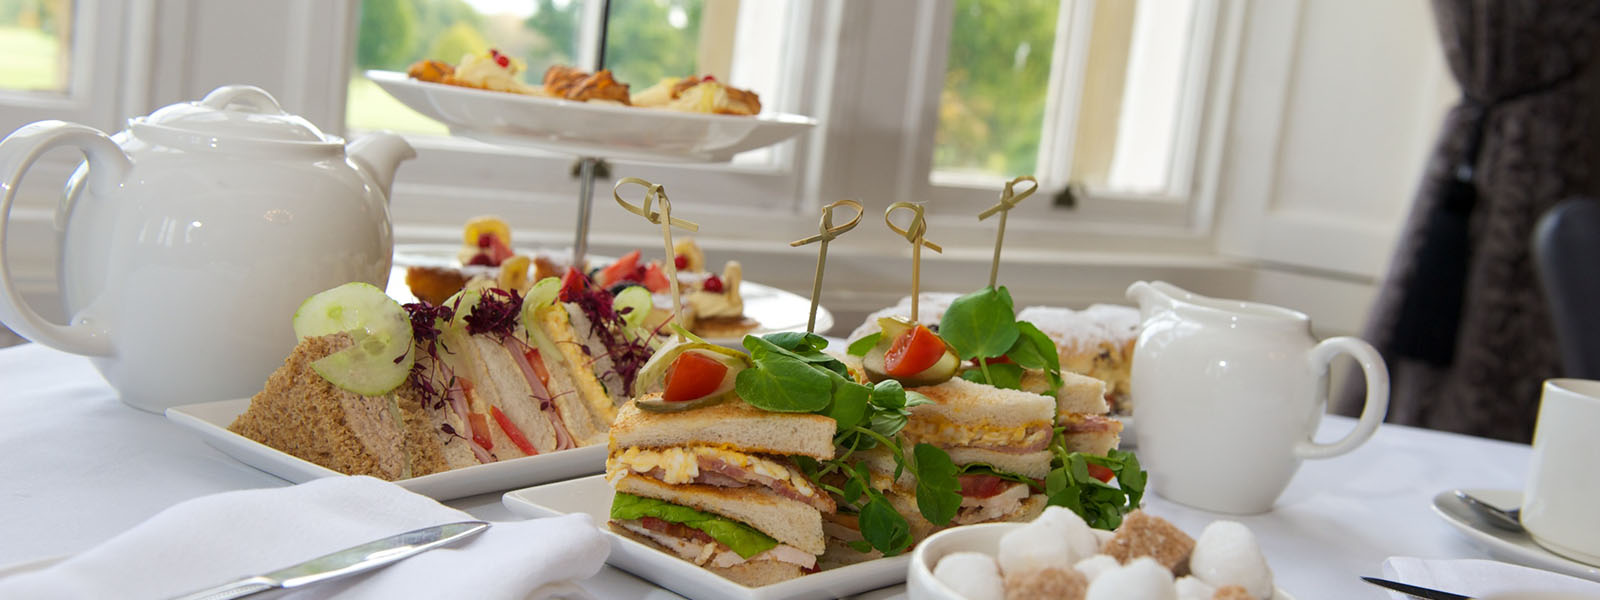 Afternoon Tea – assortment of finger sandwiches with tea, coffee, scones and selection of cakes